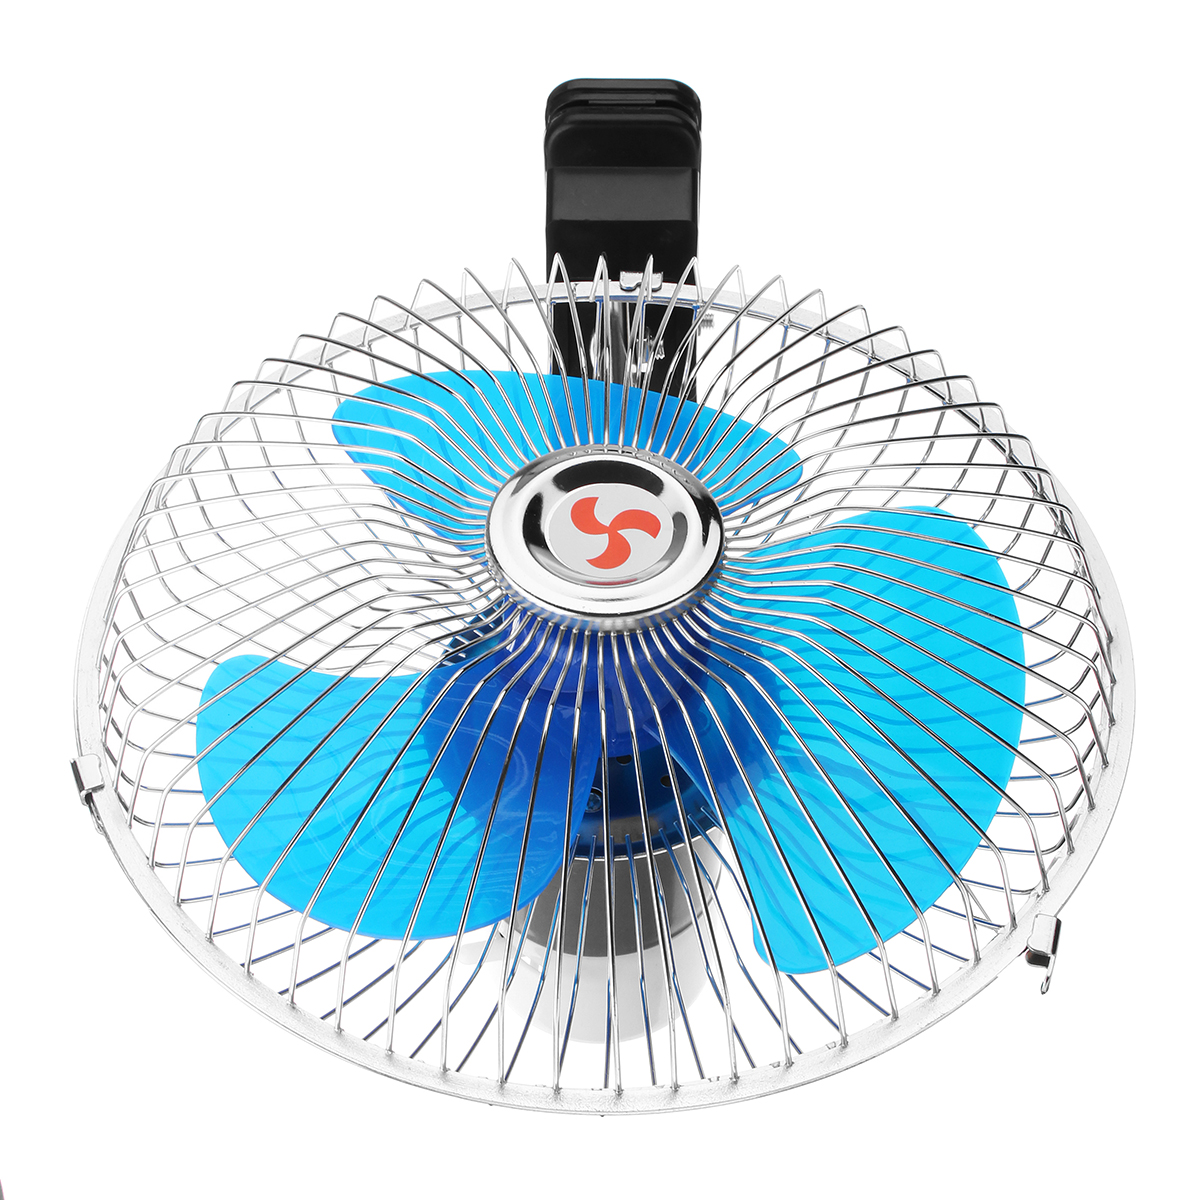 8-Inch-12V-Mini-Electric-Oscillating-Air-Cooling-Fan-Clip-Conditioner-Cooler-Fan-For-Auto-Truck-1330259